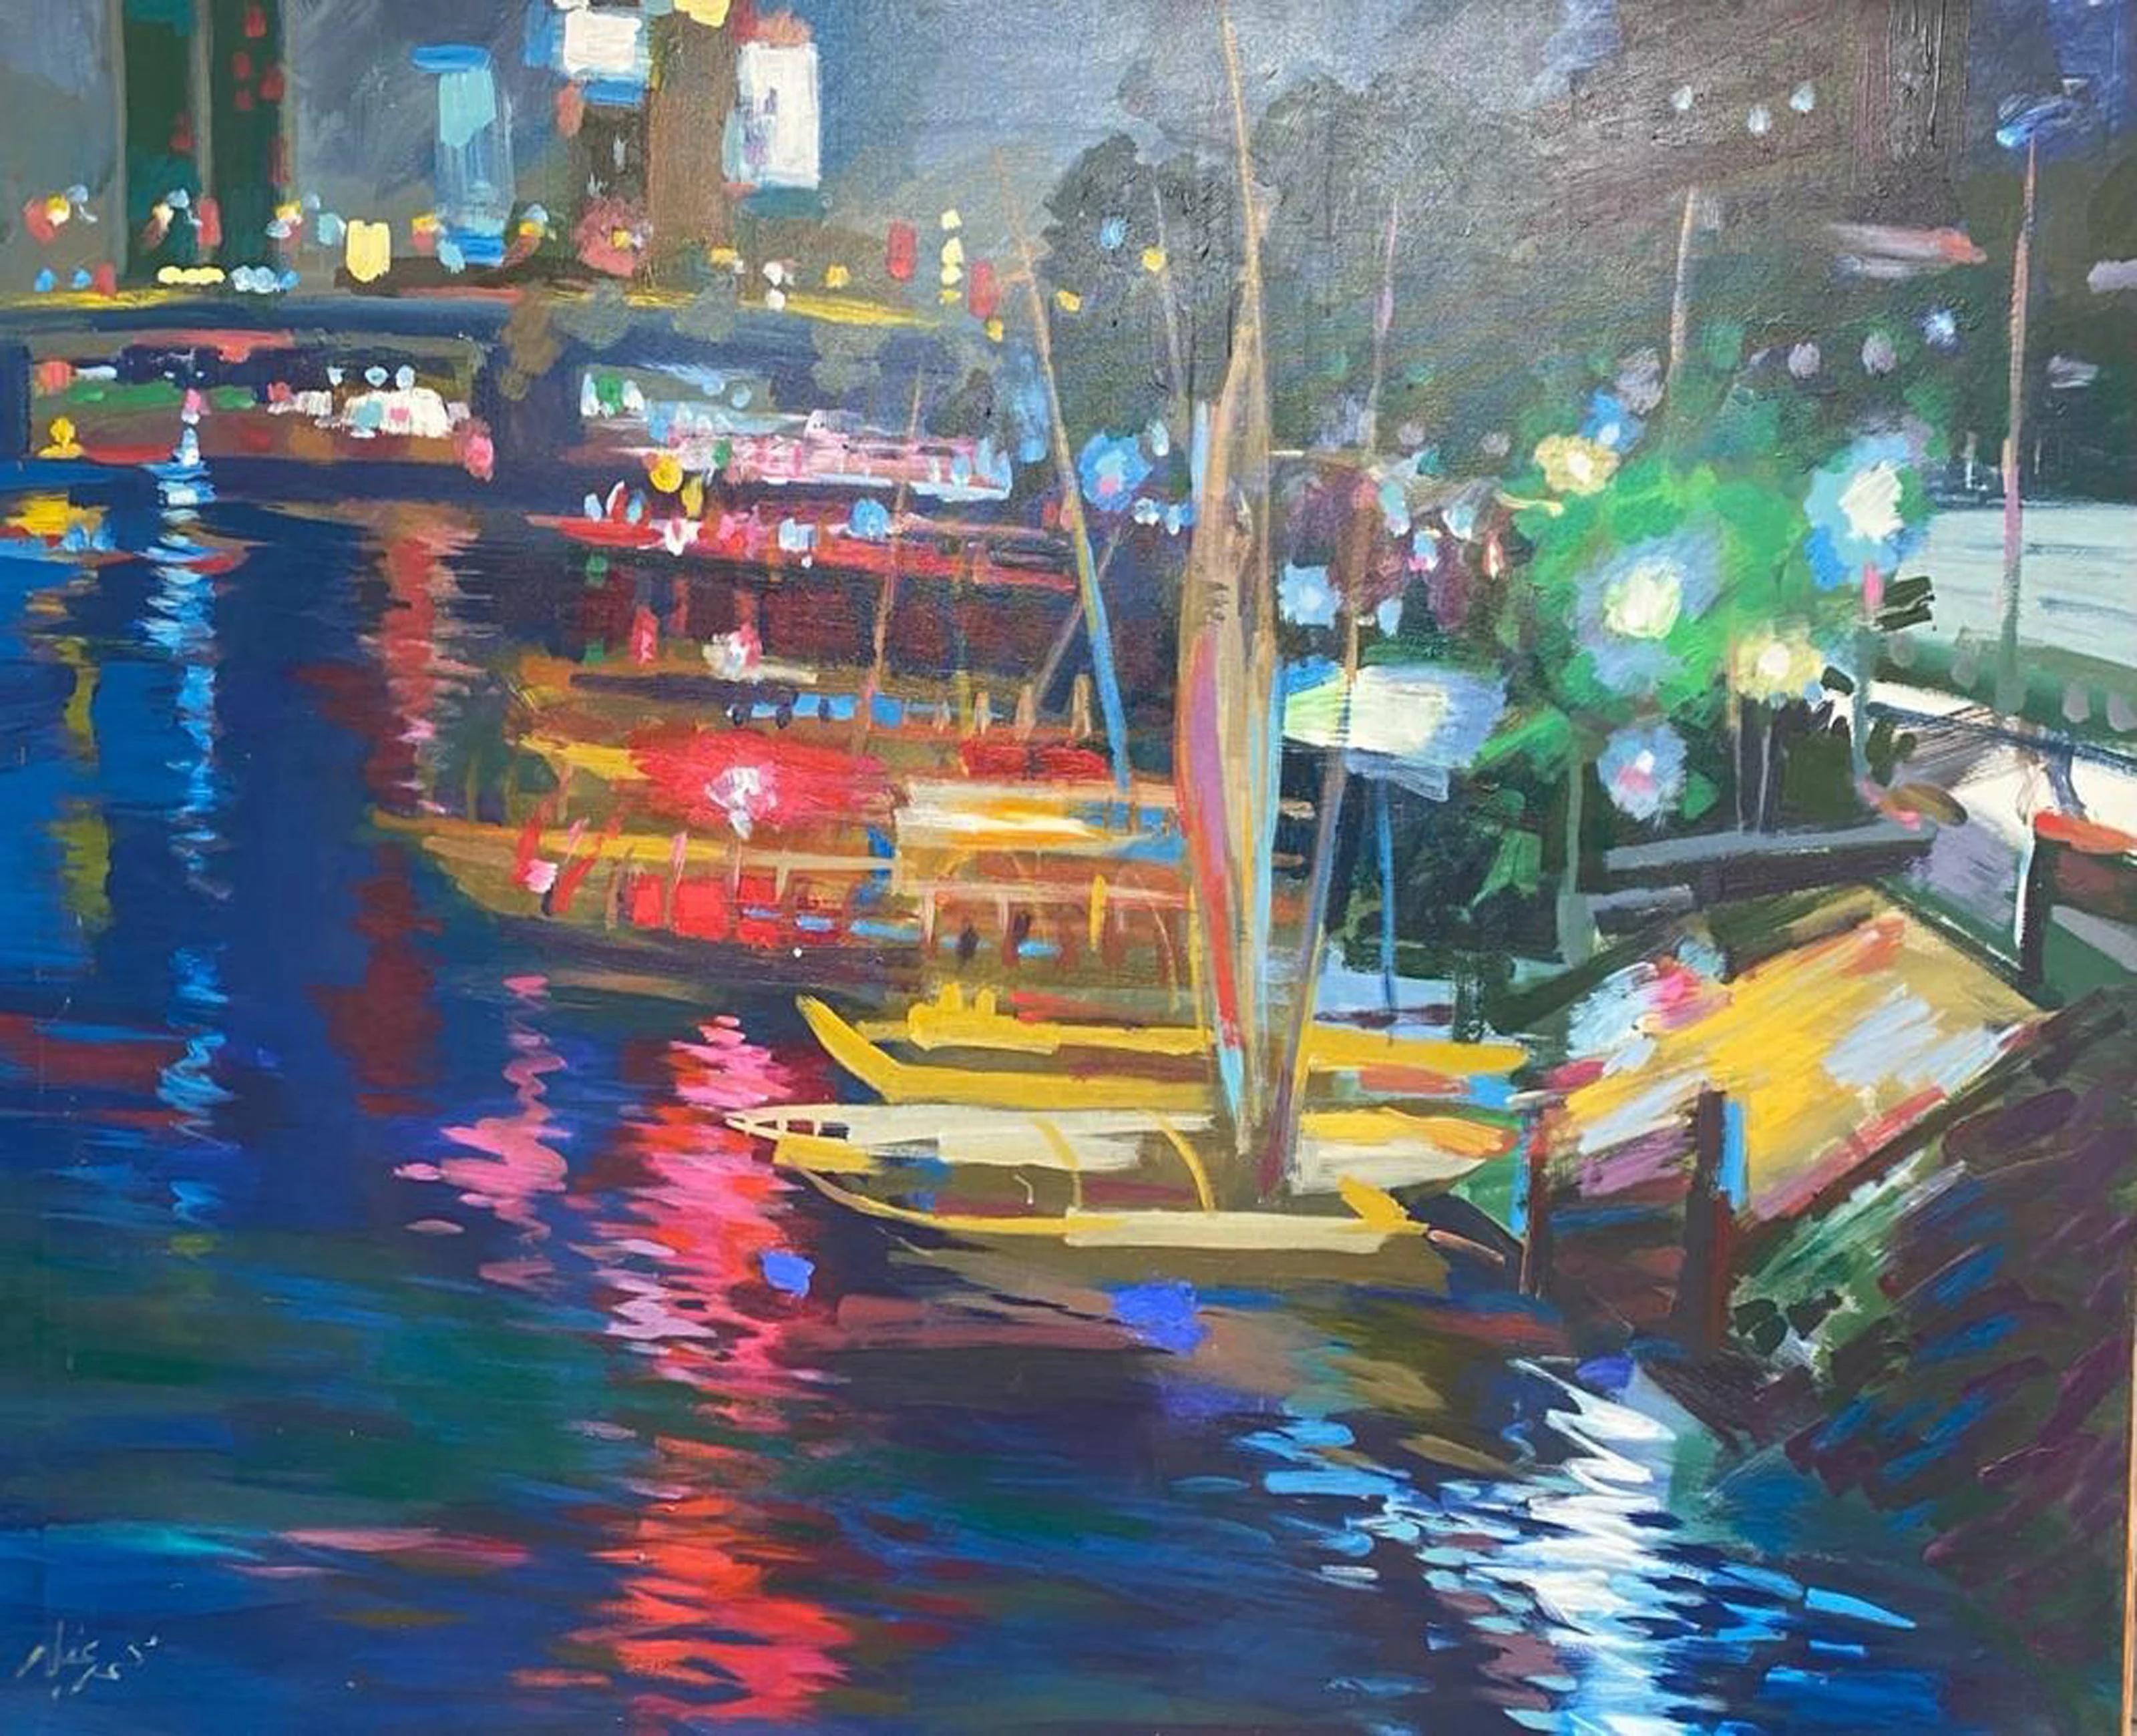 "Nile by Night II" Painting 47" x 63" inch by Mohamed Abla


Mohamed Abla was born in Mansoura (North of Egypt) in 1953. There he spent his childhood and finished school. In 1973 he moved to Alexandria to start a five-year art study at the faculty